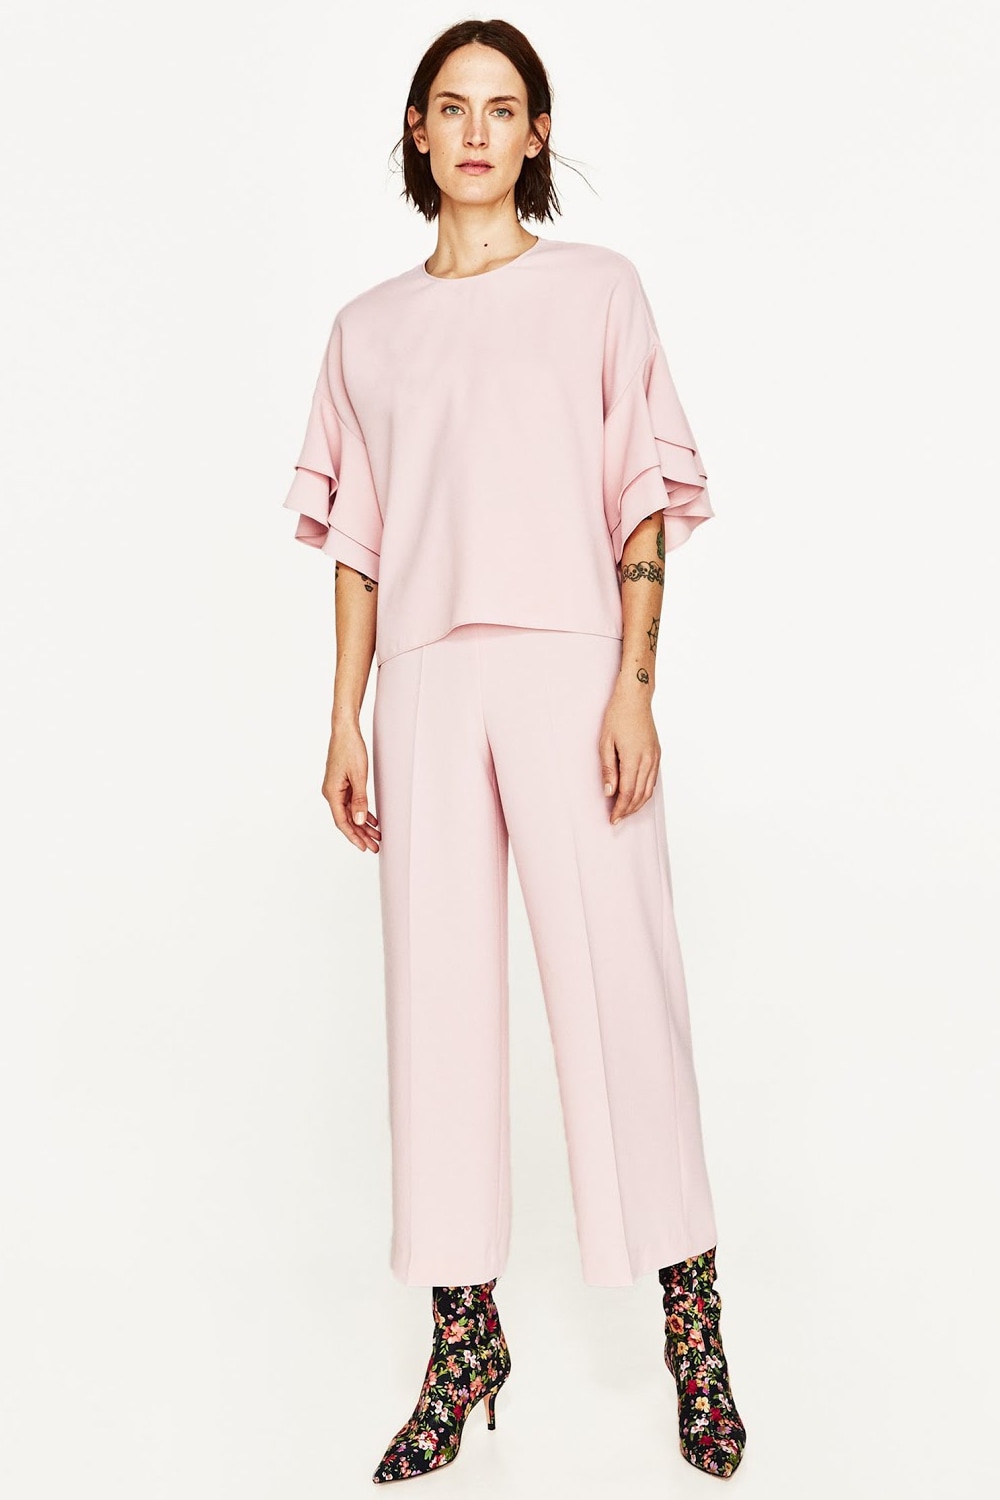 Zara pastel pink frill top and culottes